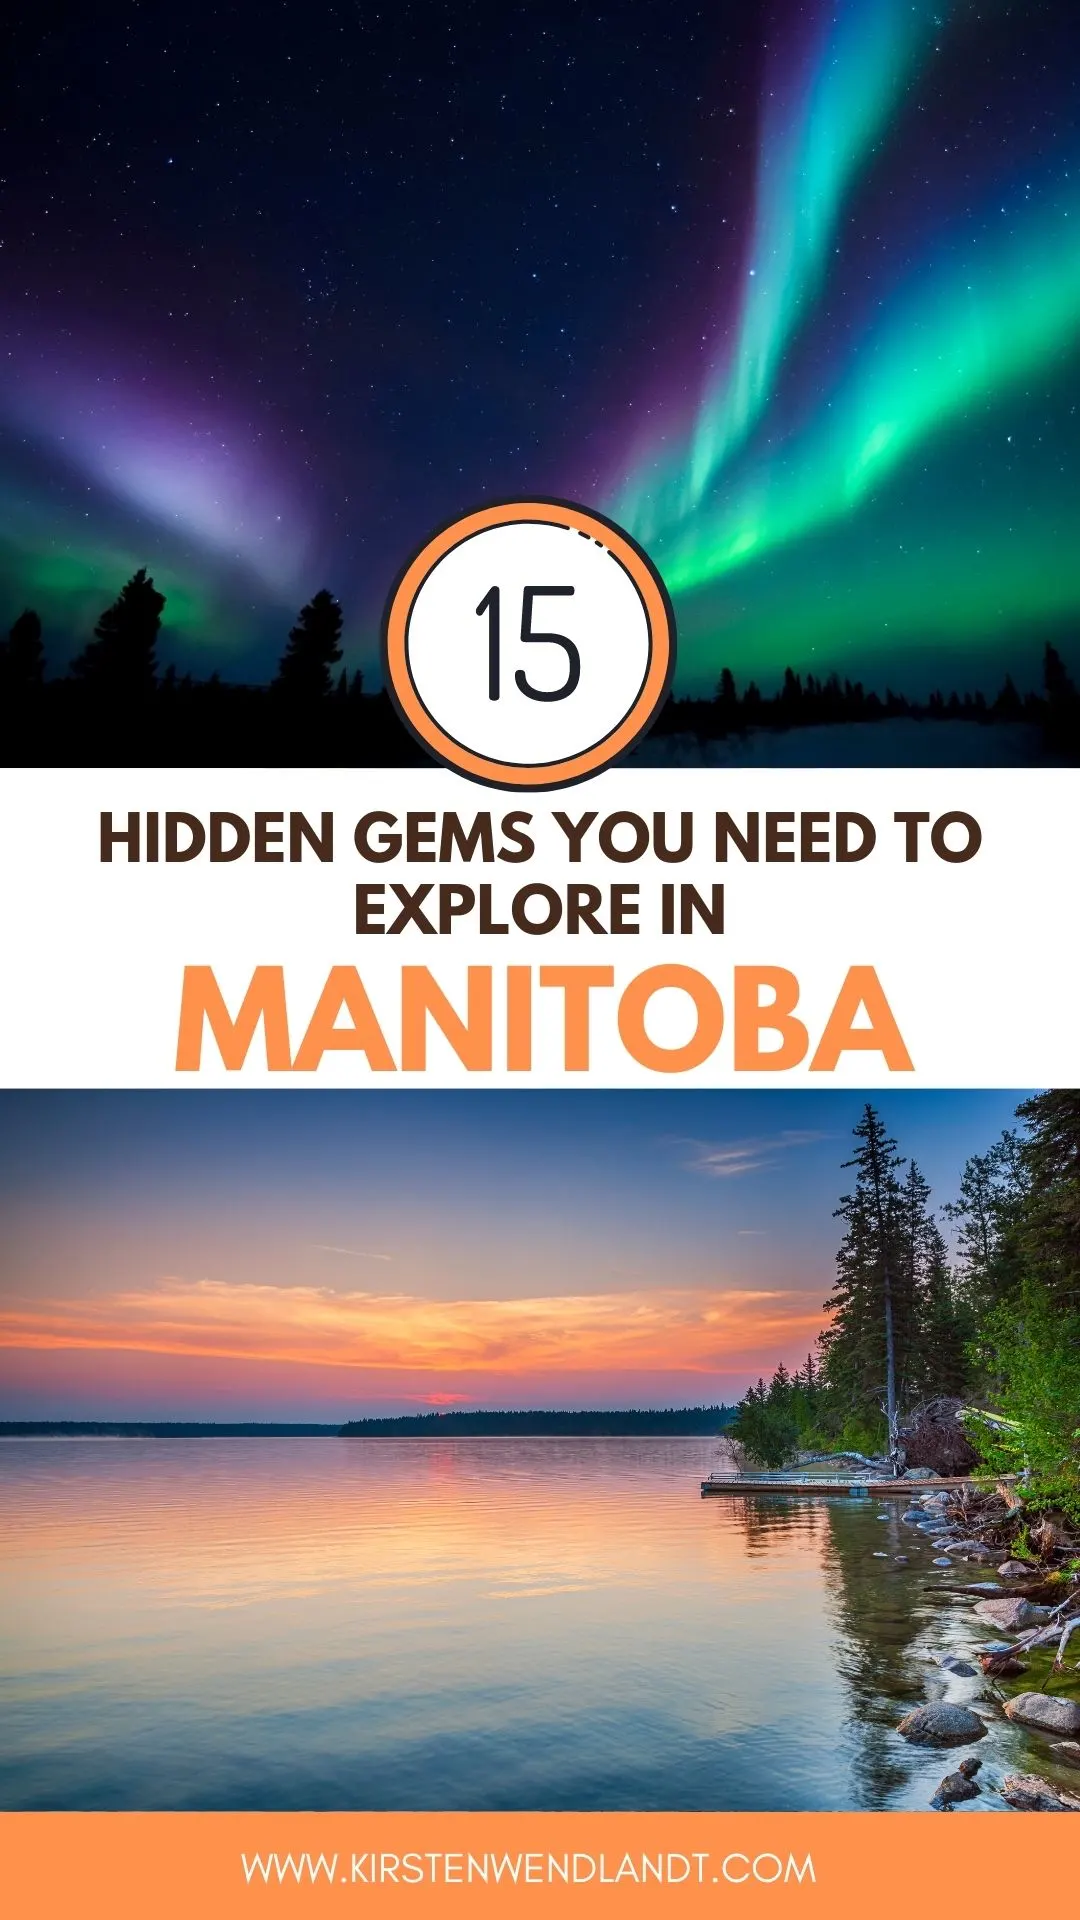 While some provinces in Canada get all the fame and are top of mind for people wanting to visit and explore more of Canada, Manitoba is not usually top of list. You'll soon find out though there are a ton of hidden gems in Manitoba! Manitoba it turns out, is such an incredible province with so much to explore. Here are 15 hidden gems in Manitoba you won't want to miss during your visit!